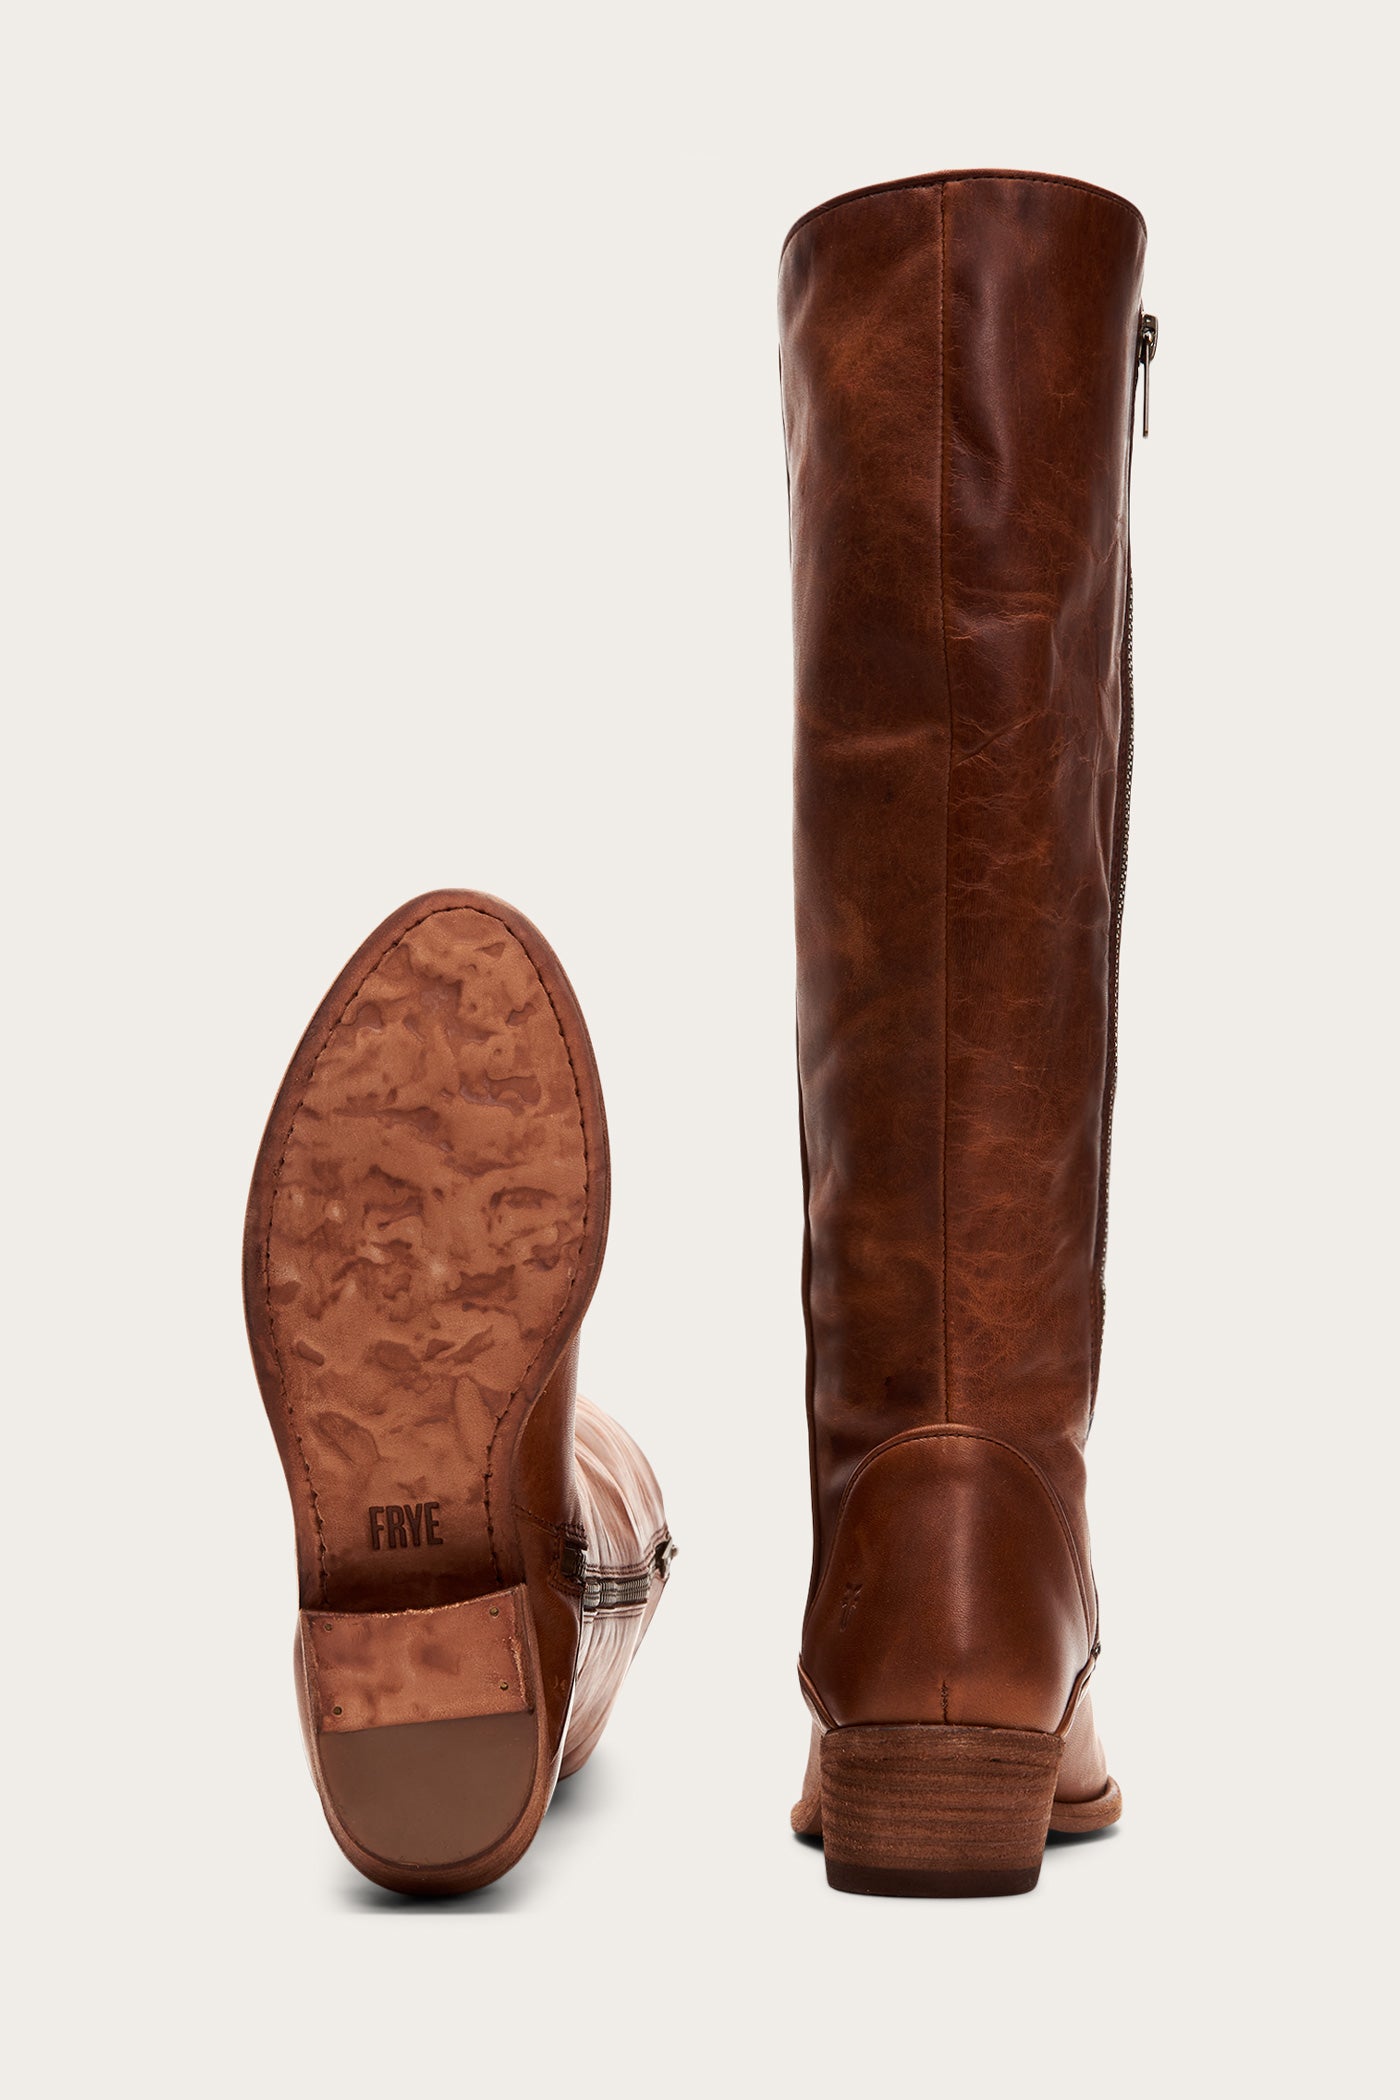 carson frye boots